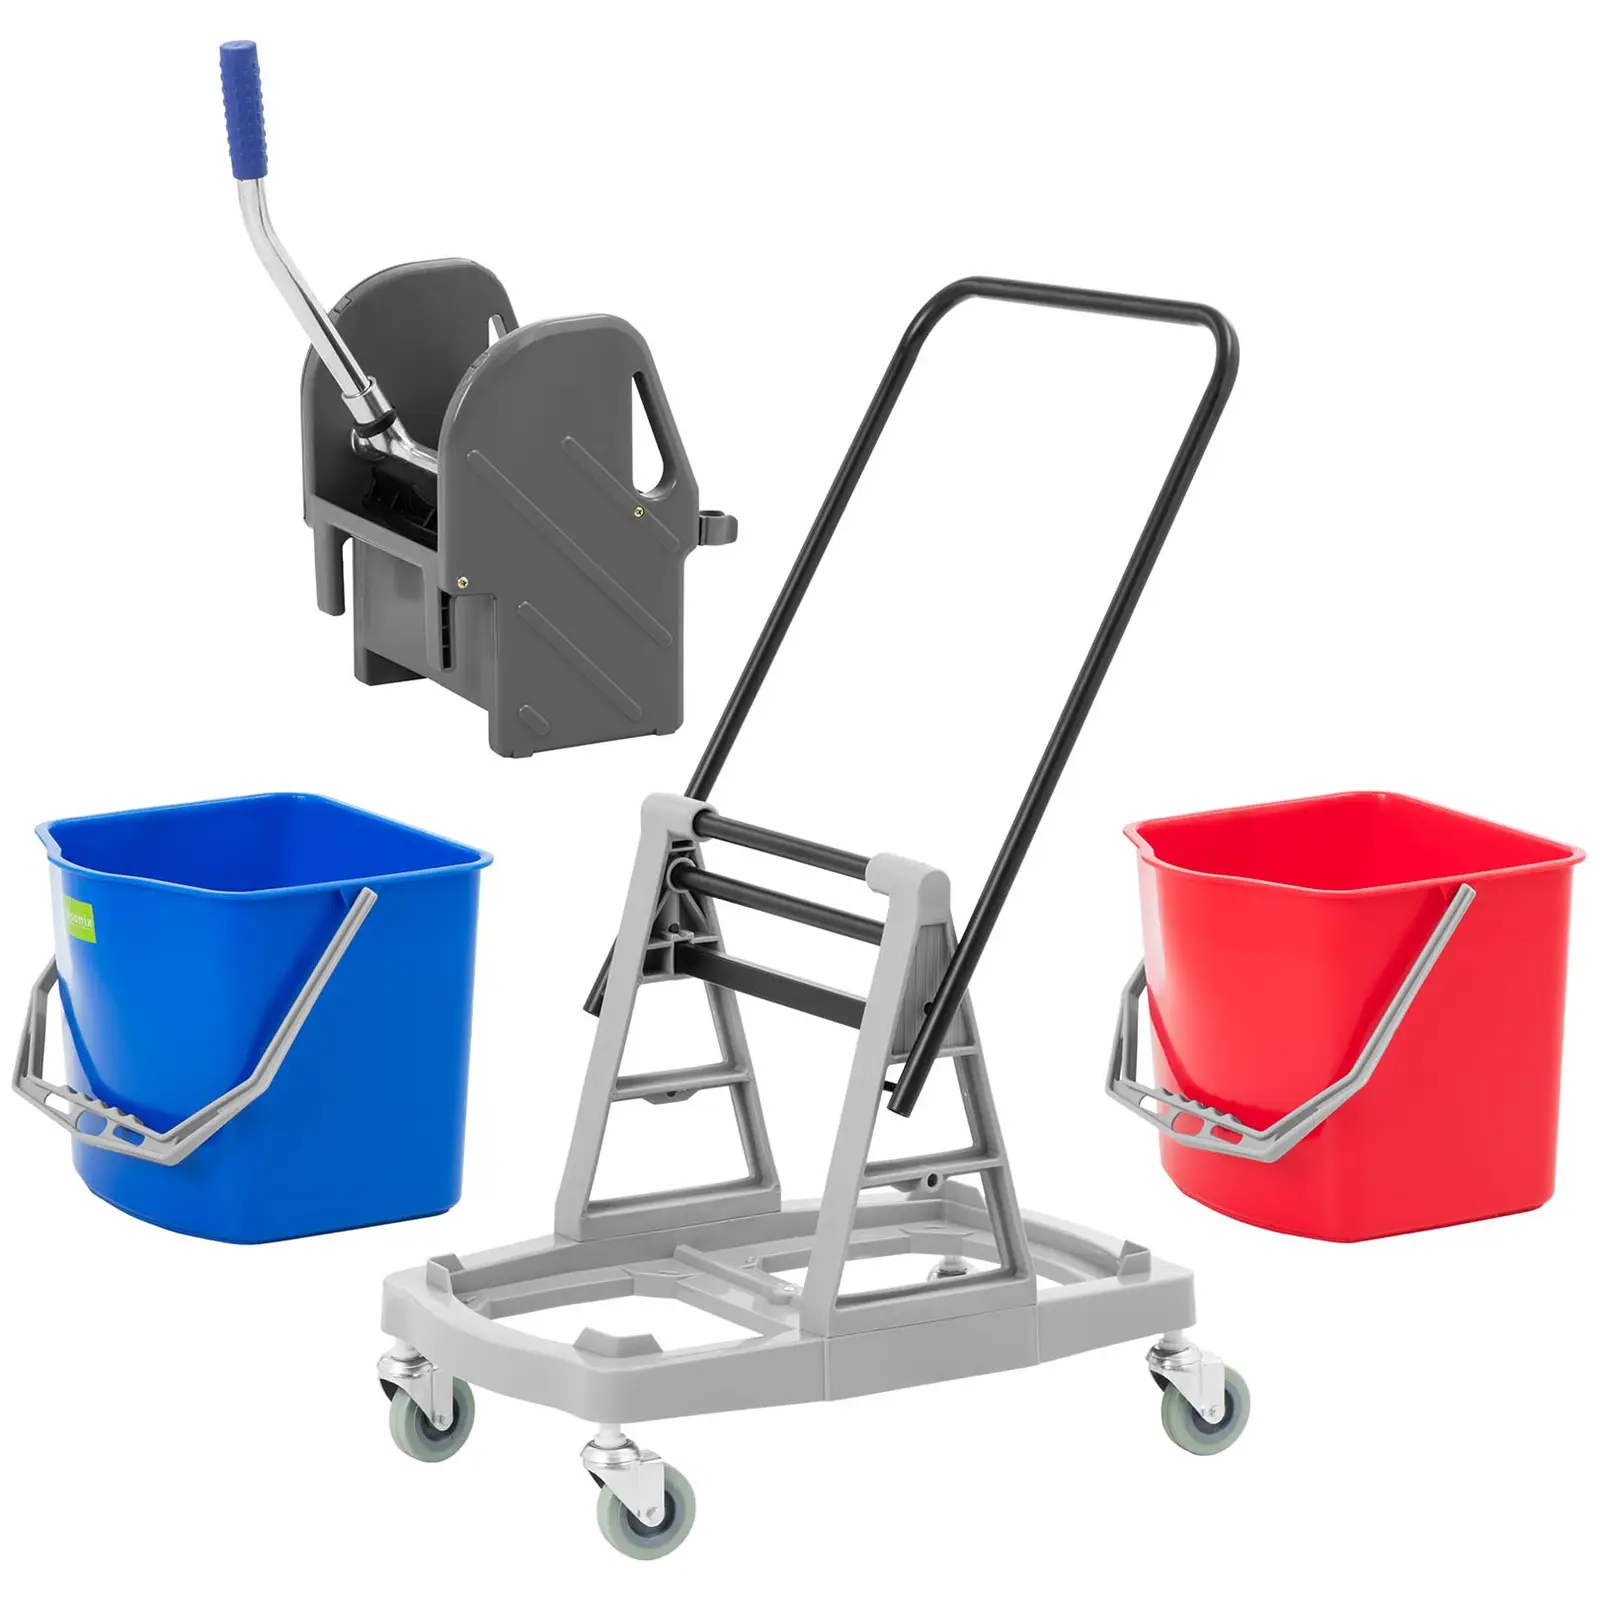 Cleaning Trolley - with press - 2 buckets - 2 x 17 L